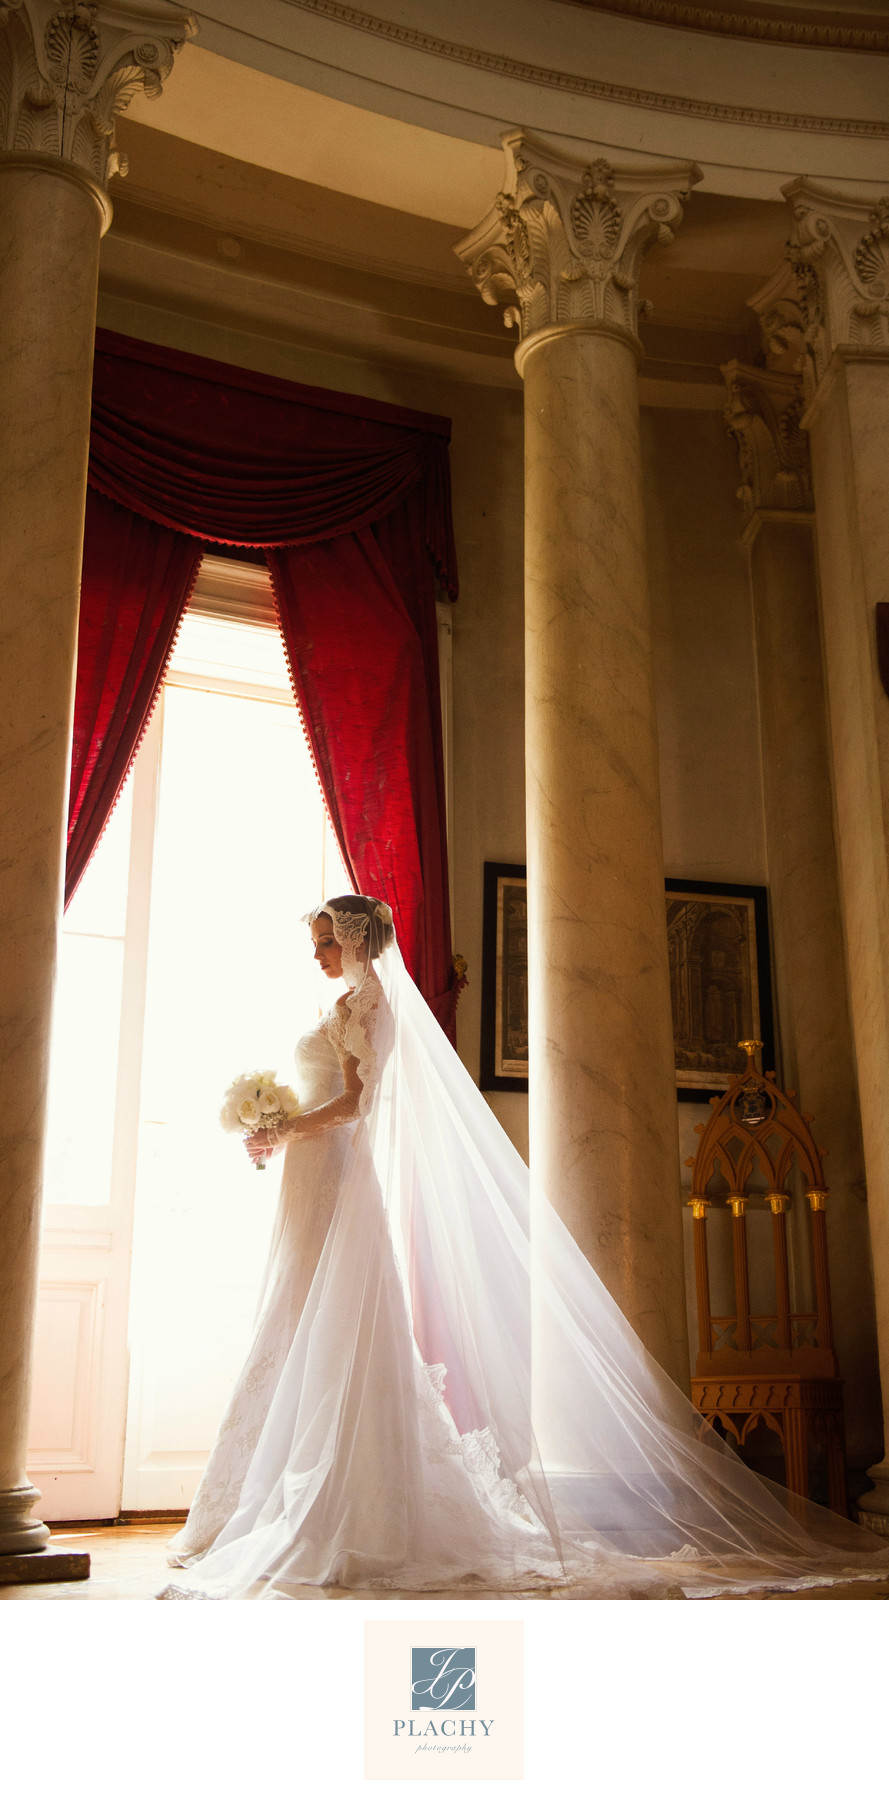 Wedding Image of the Bride in Imperial Hotel Vienna